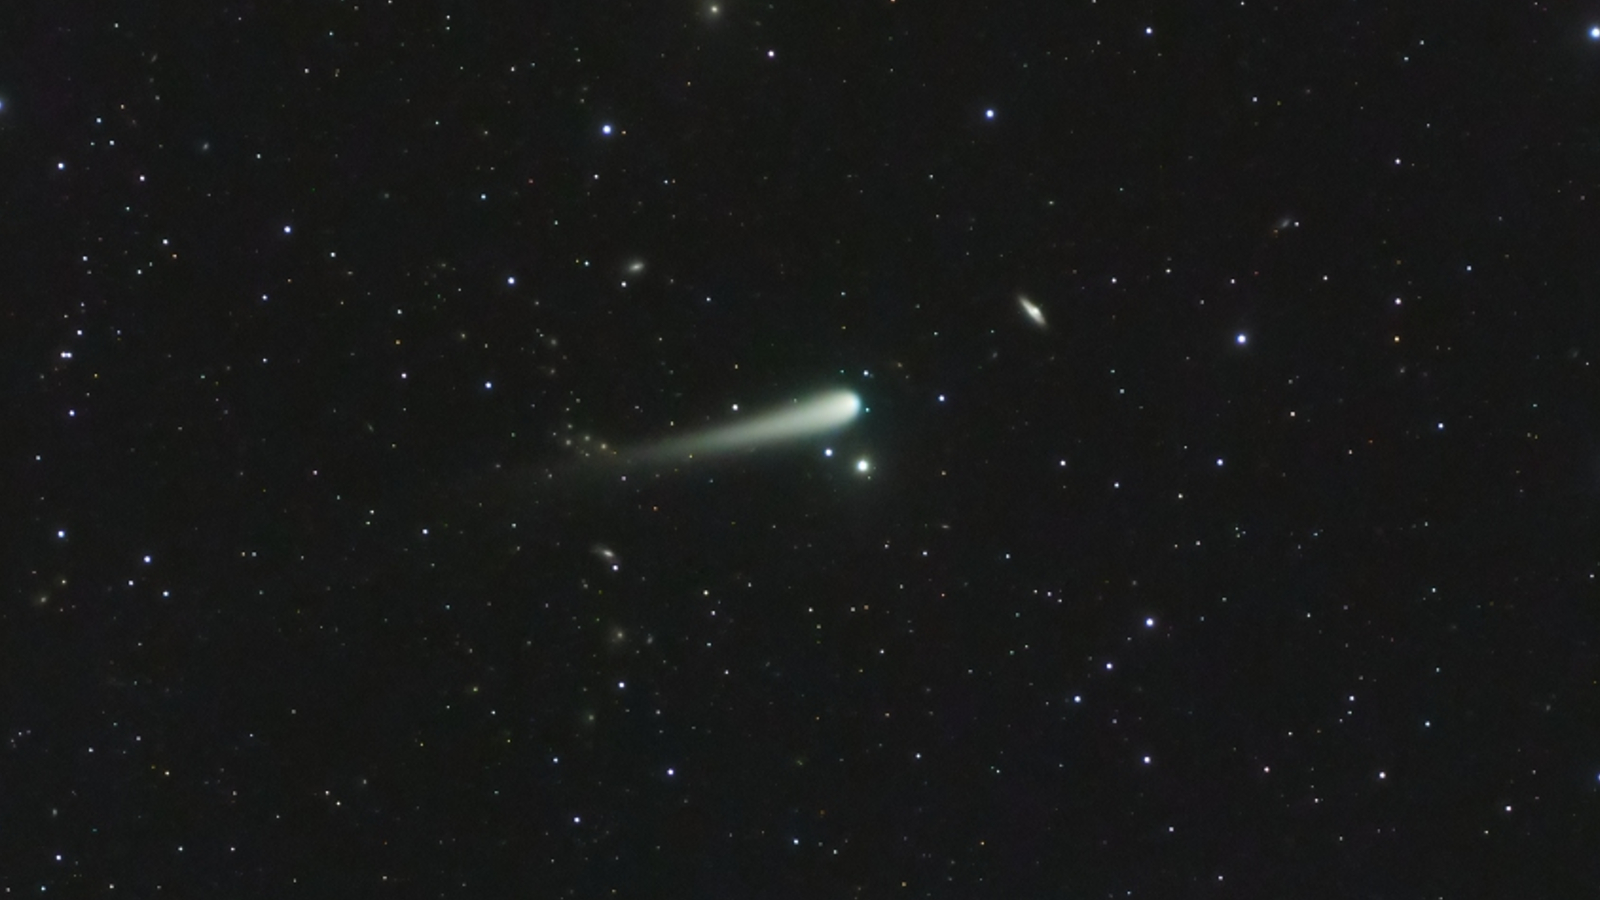  Comet predicted to light up Earth's skies this fall may be falling apart 